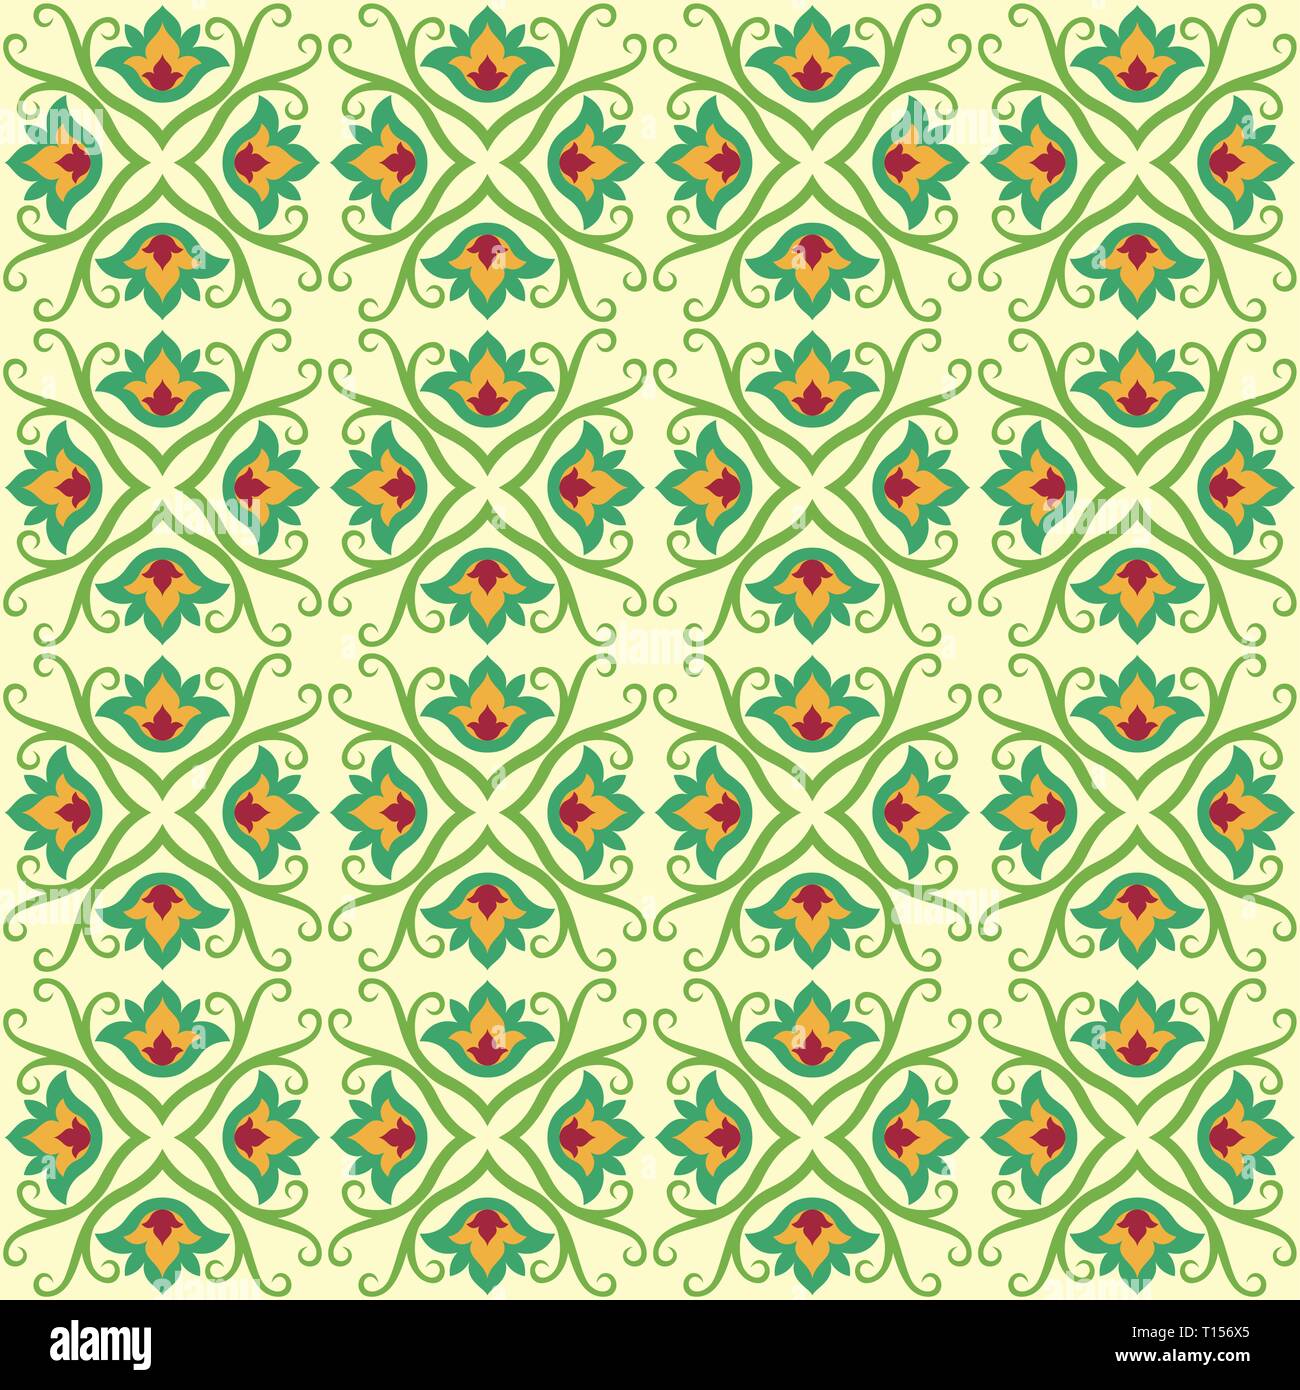 Flower seamless vector pattern for Postcards, wallpaper, web background, Print and fabric Stock Vector